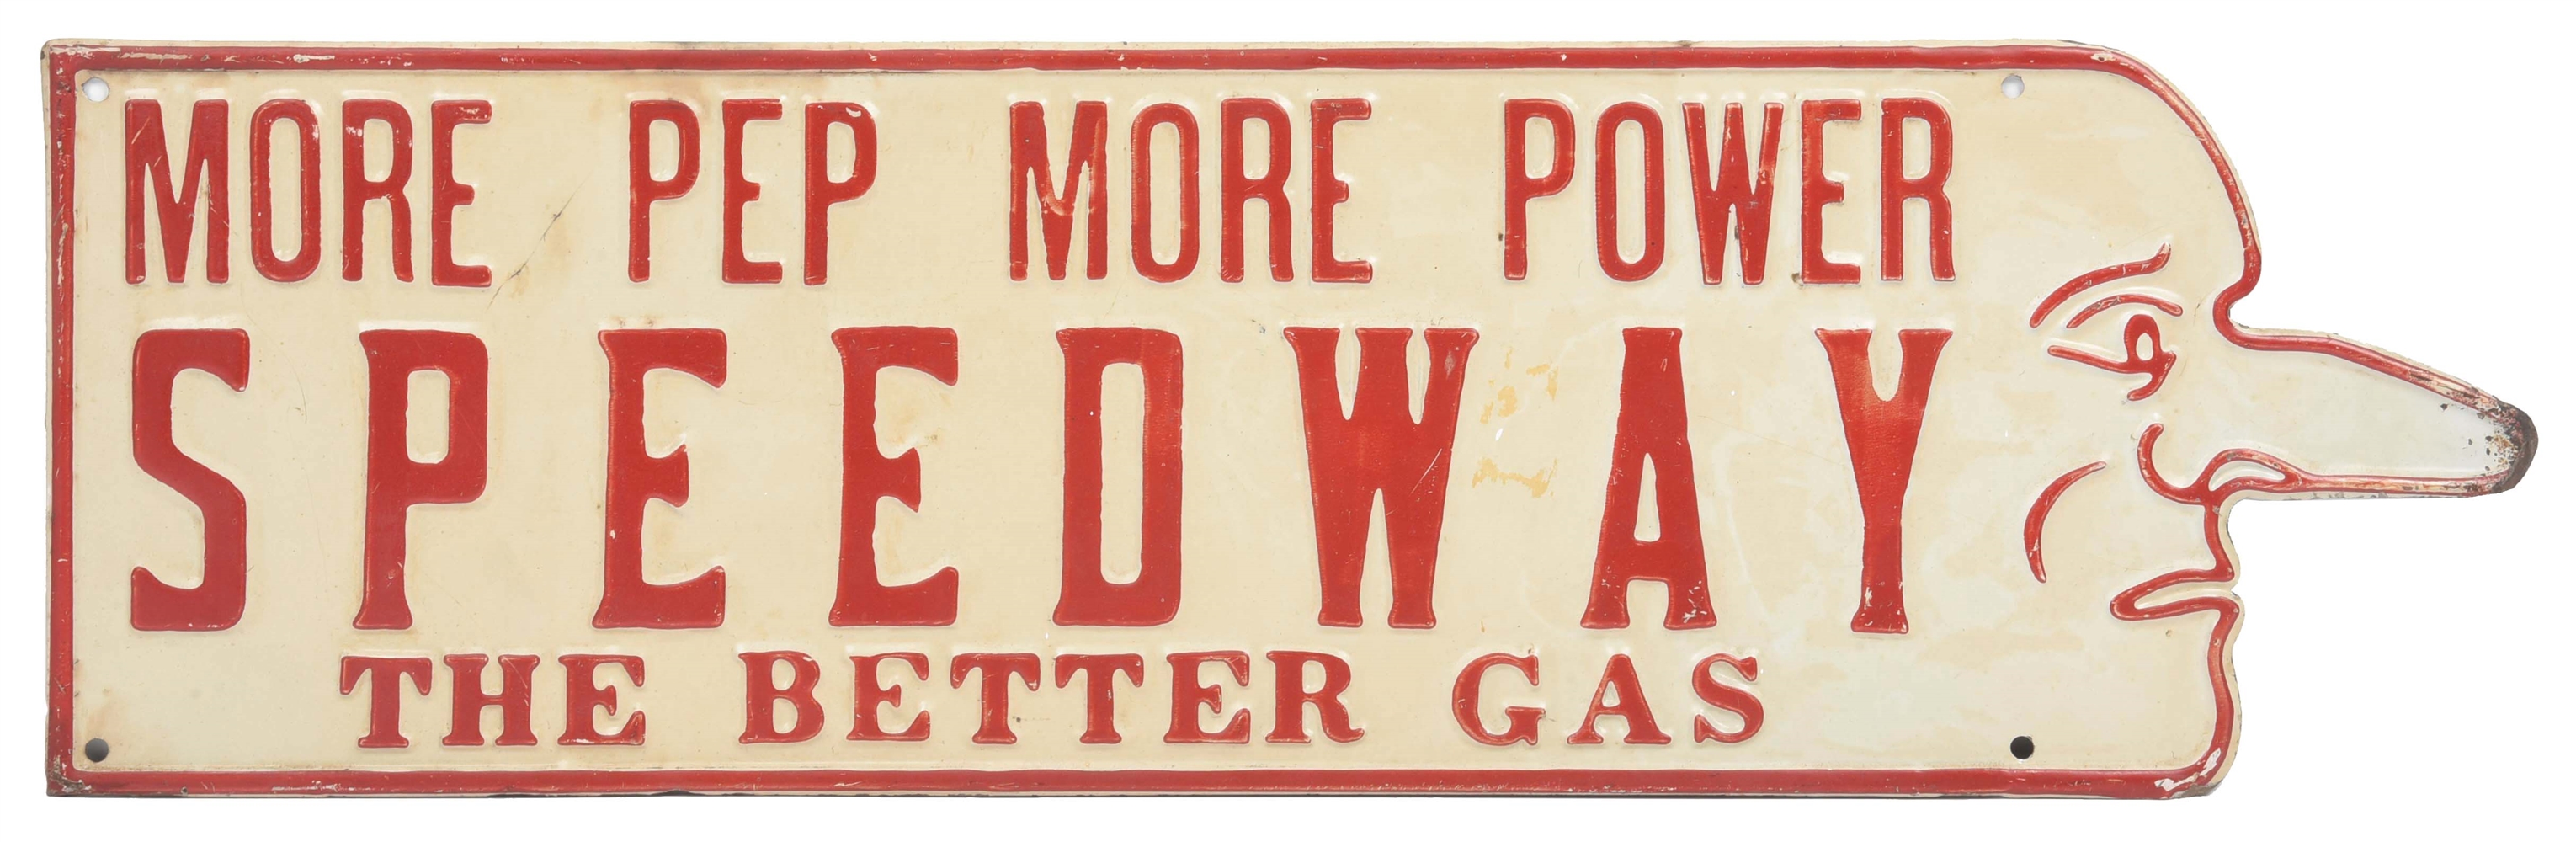 SPEEDWAY "MORE PEP MORE POWER" EMBOSSED TIN SIGN W/ FACE GRAPHIC.